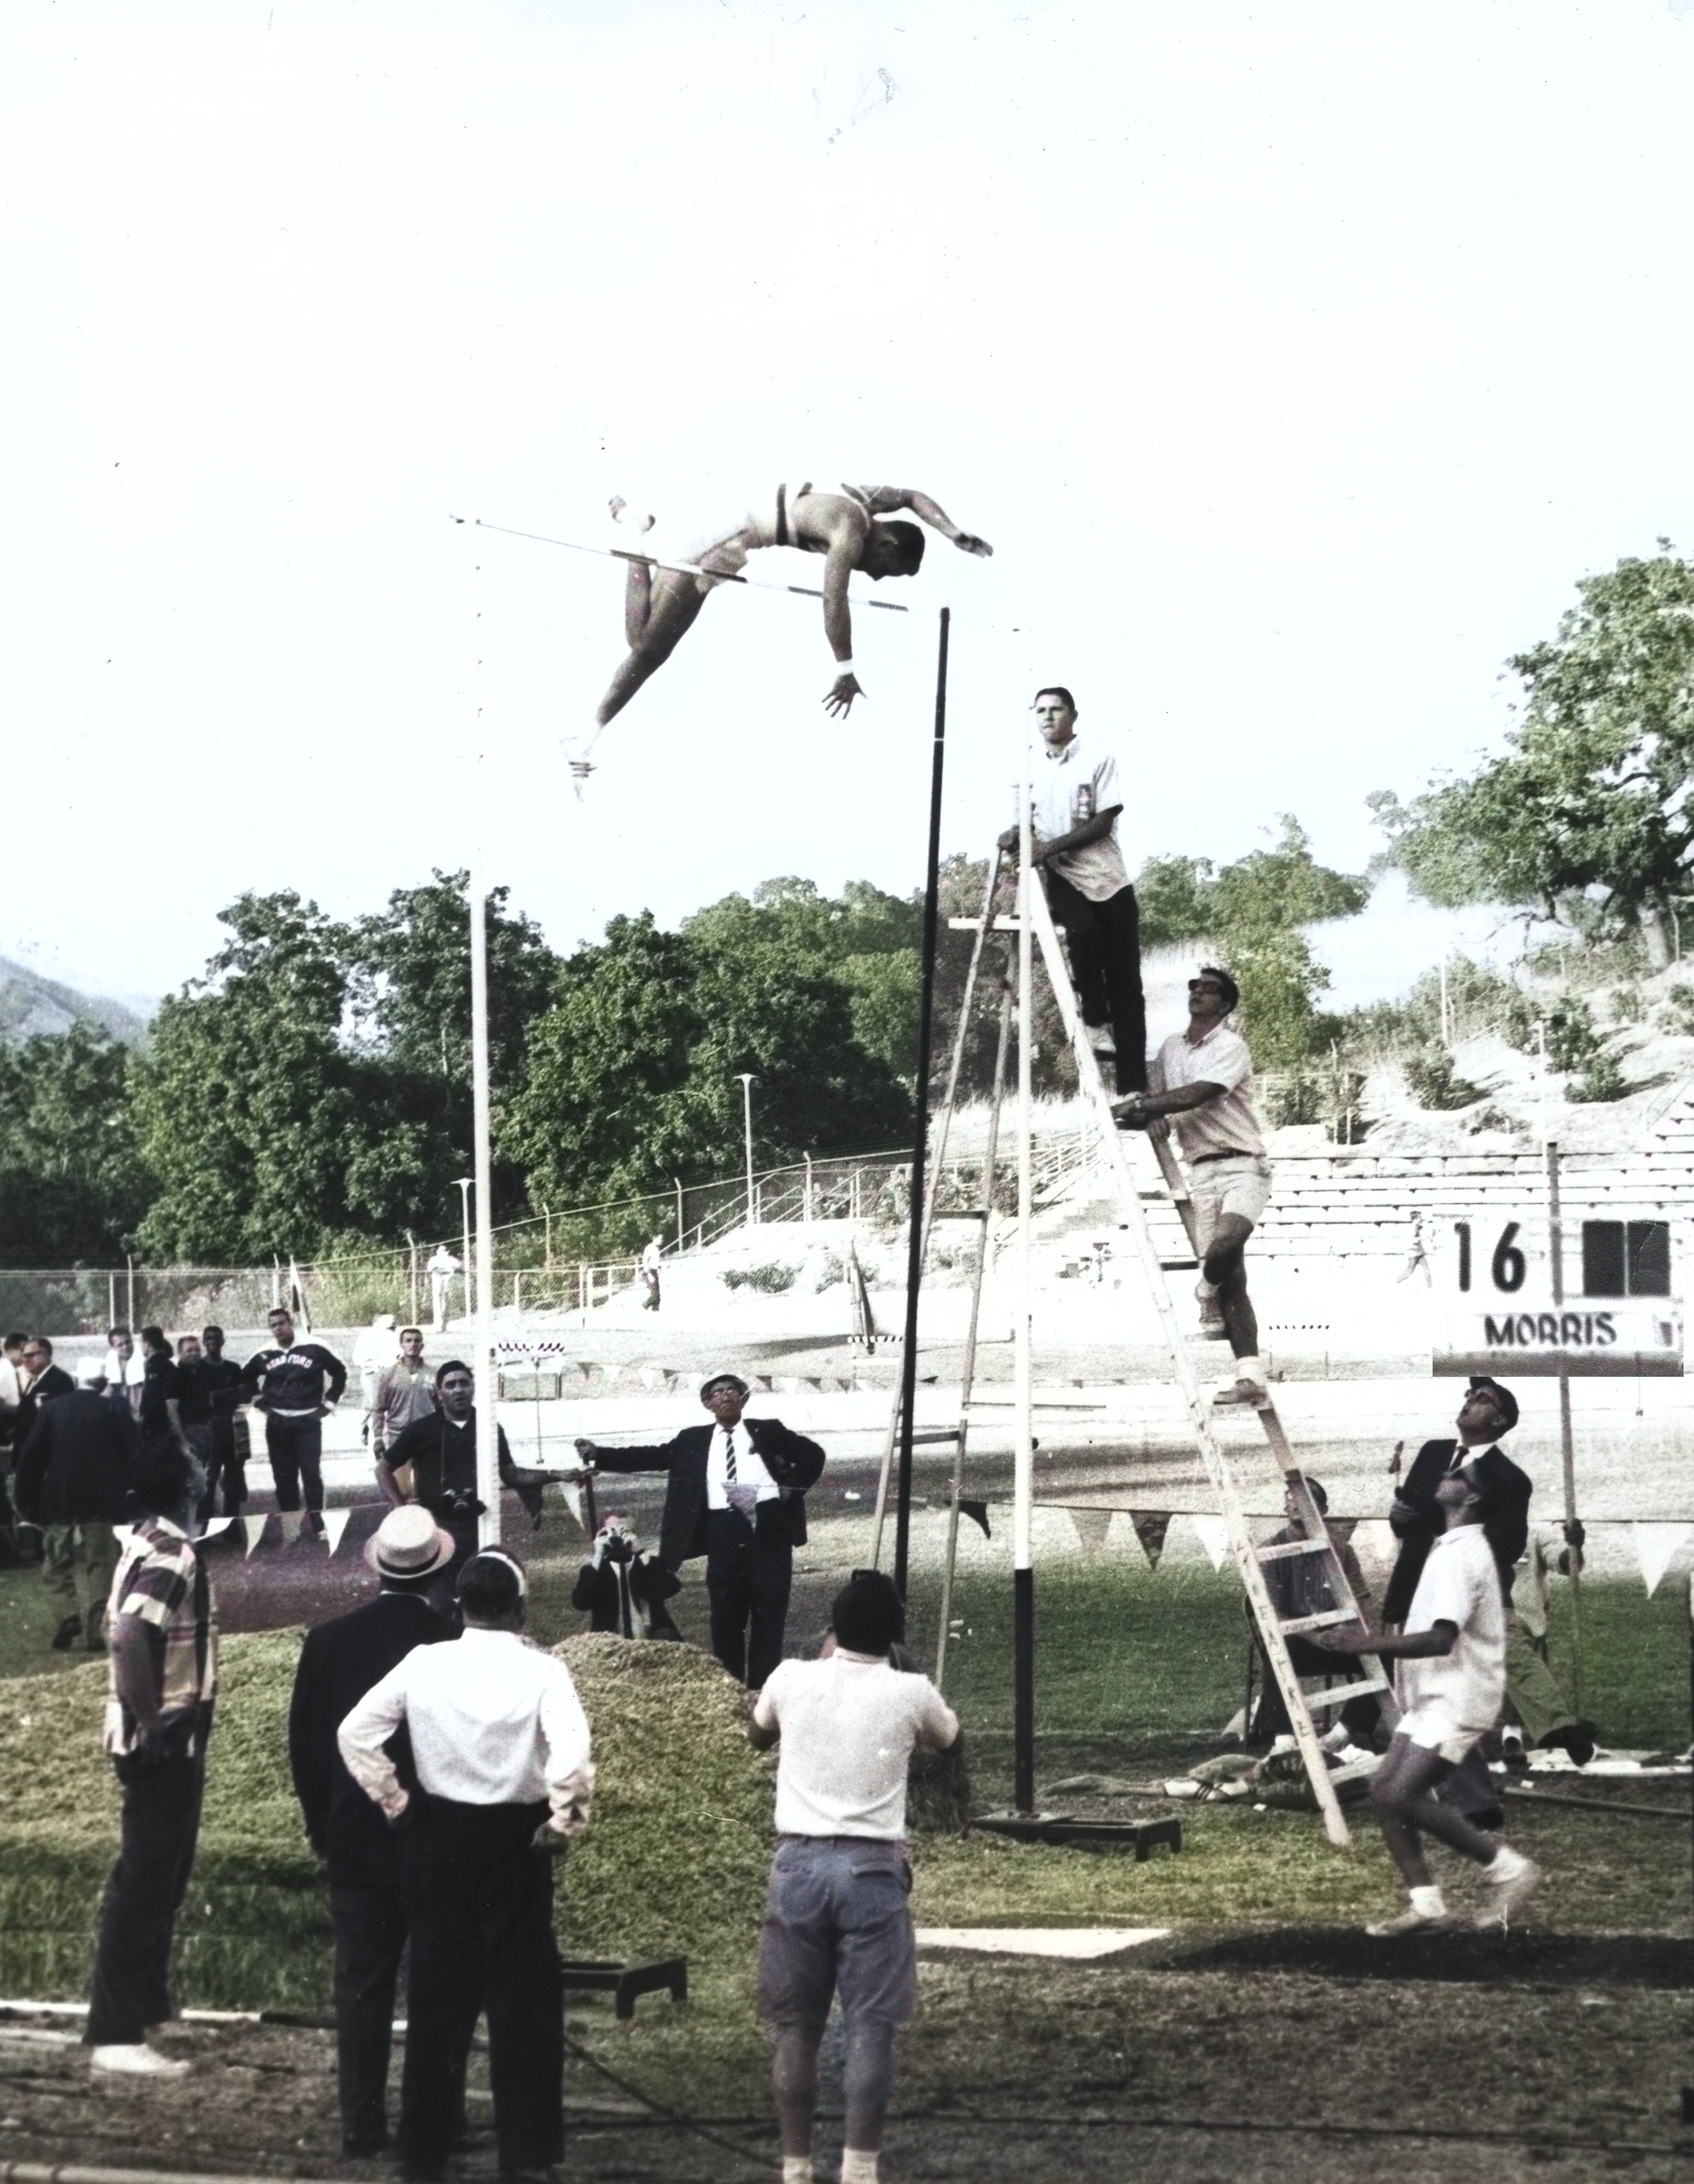 Thanks to a little Photoshop magic, Ron Morris’ 15' 8" vault becomes the 16' 1/4" personal best he jumped later that day at the 1962 AAU National Championships held at Mount San Antonio College. (This was the first full season for the fiberglass pole, but no foam pit yet!)